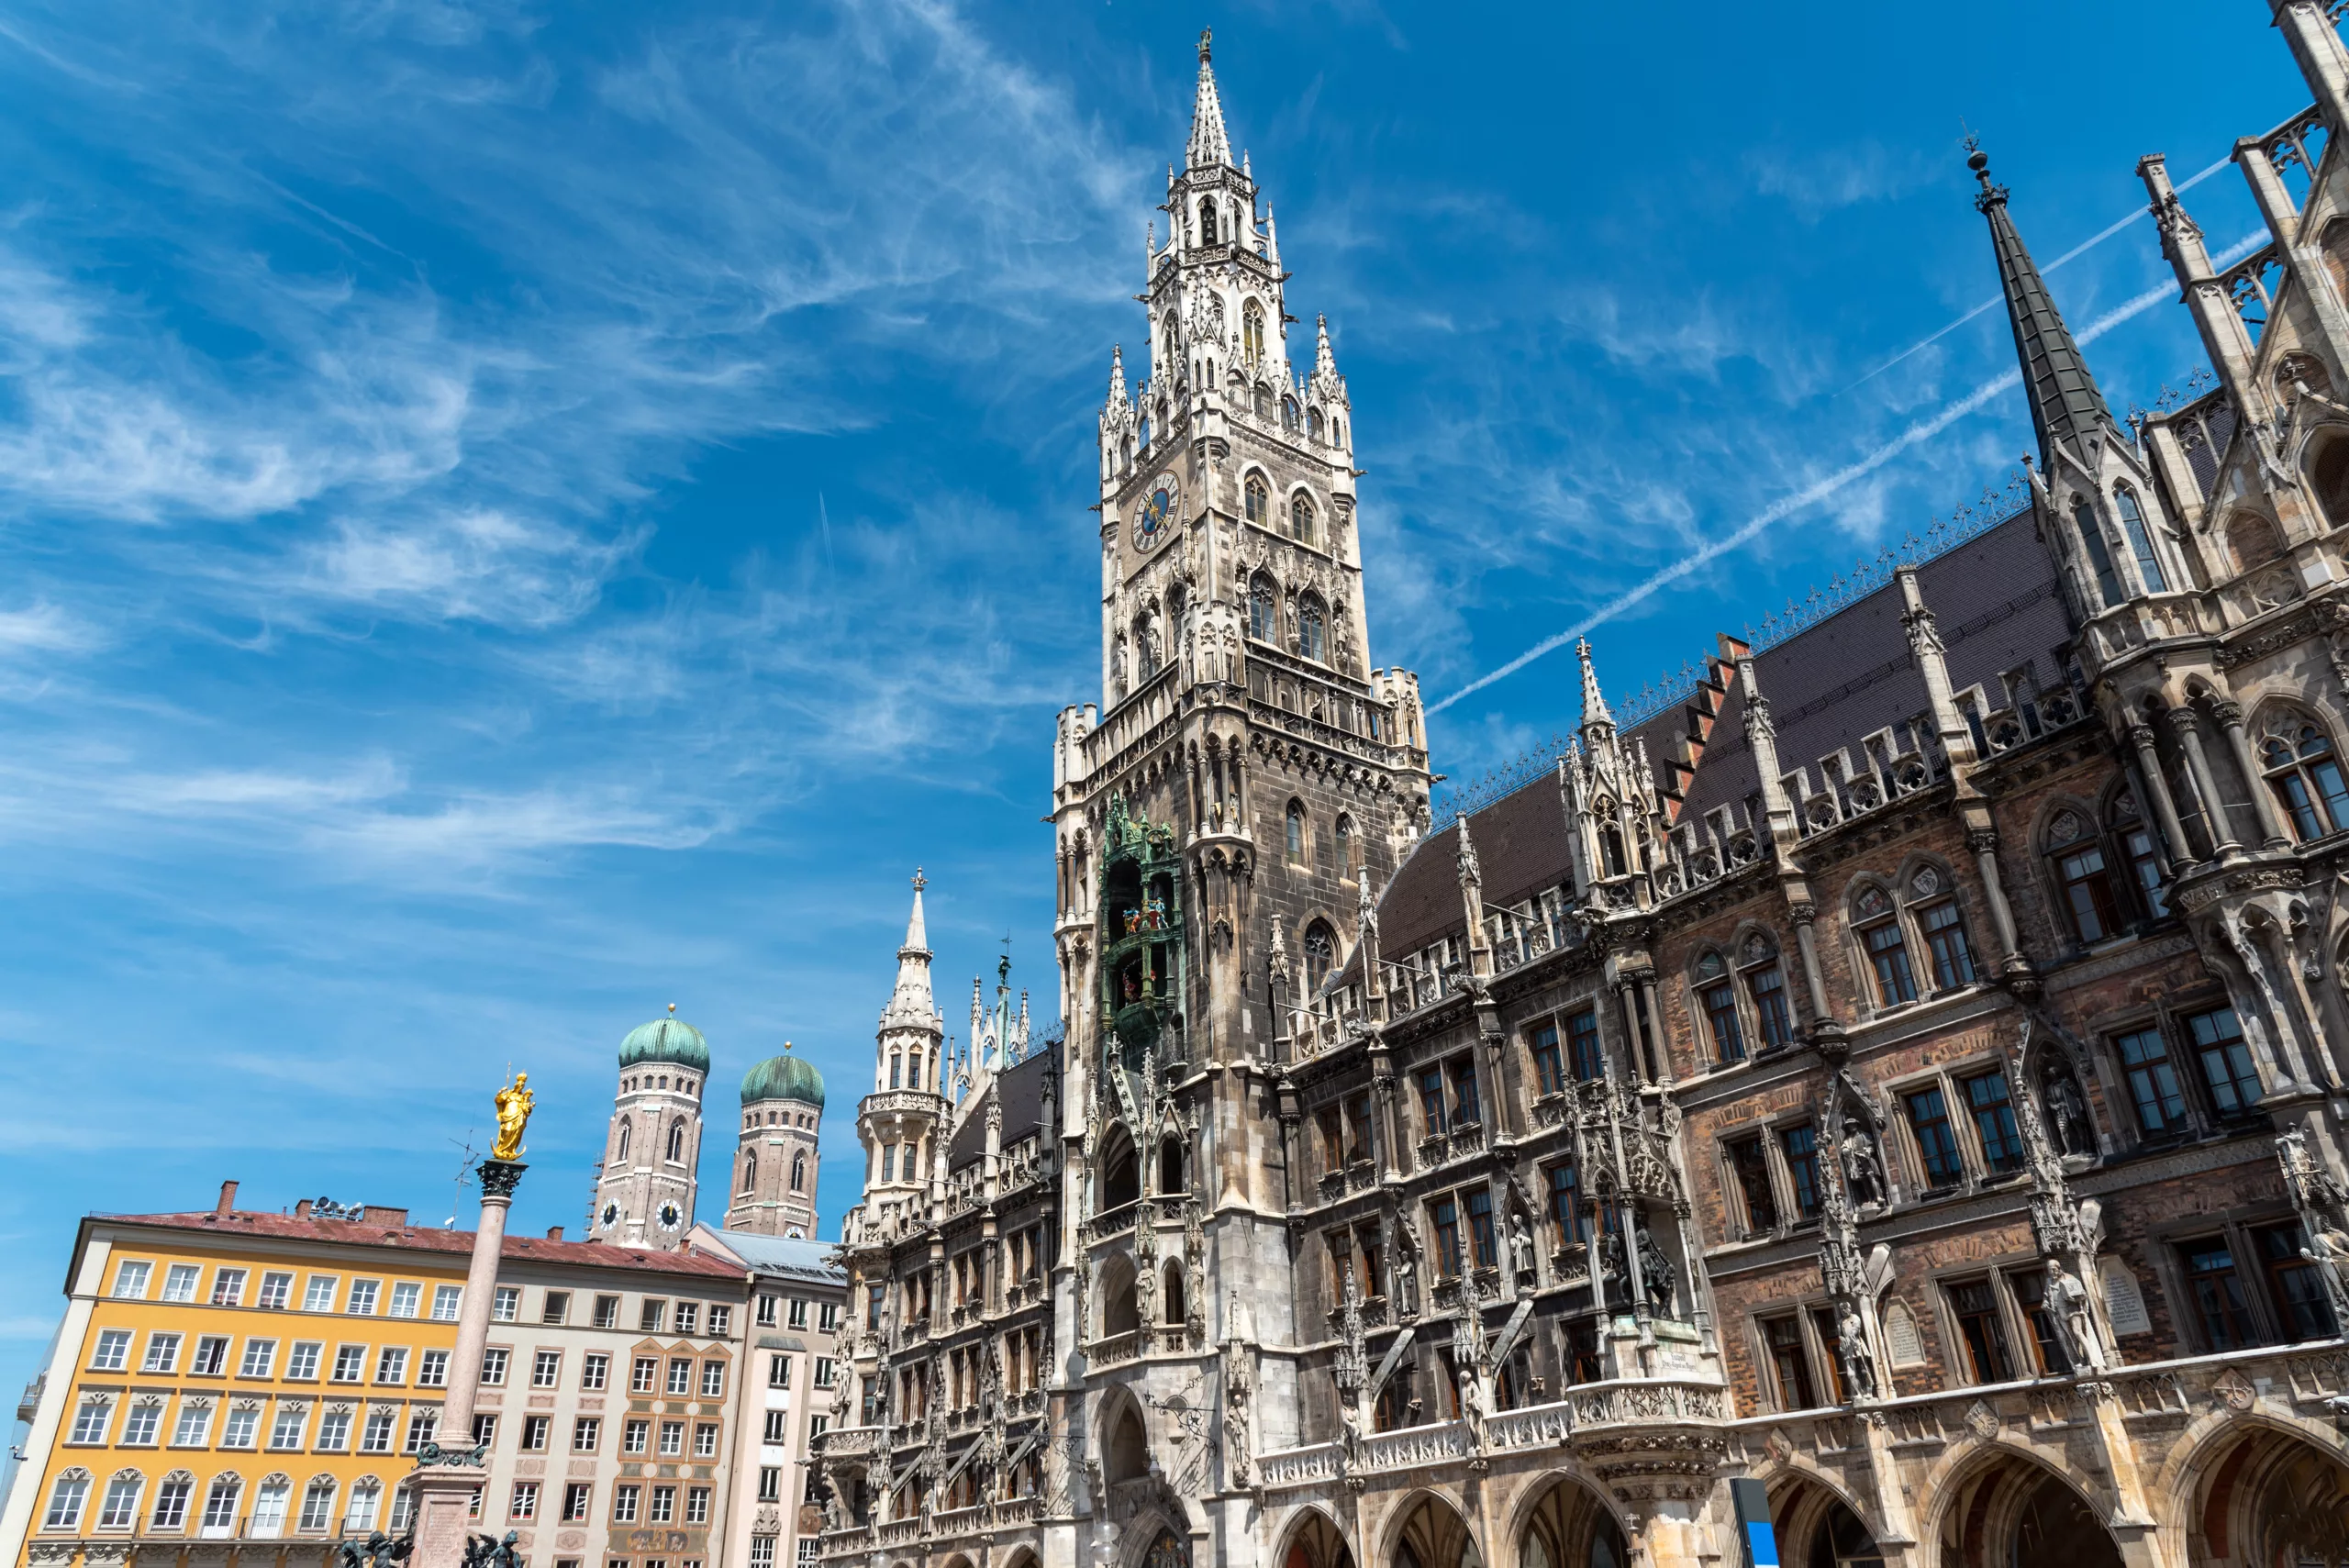 Munich's Old Town - A historical walking tour of everything you can see in city in just one hour!